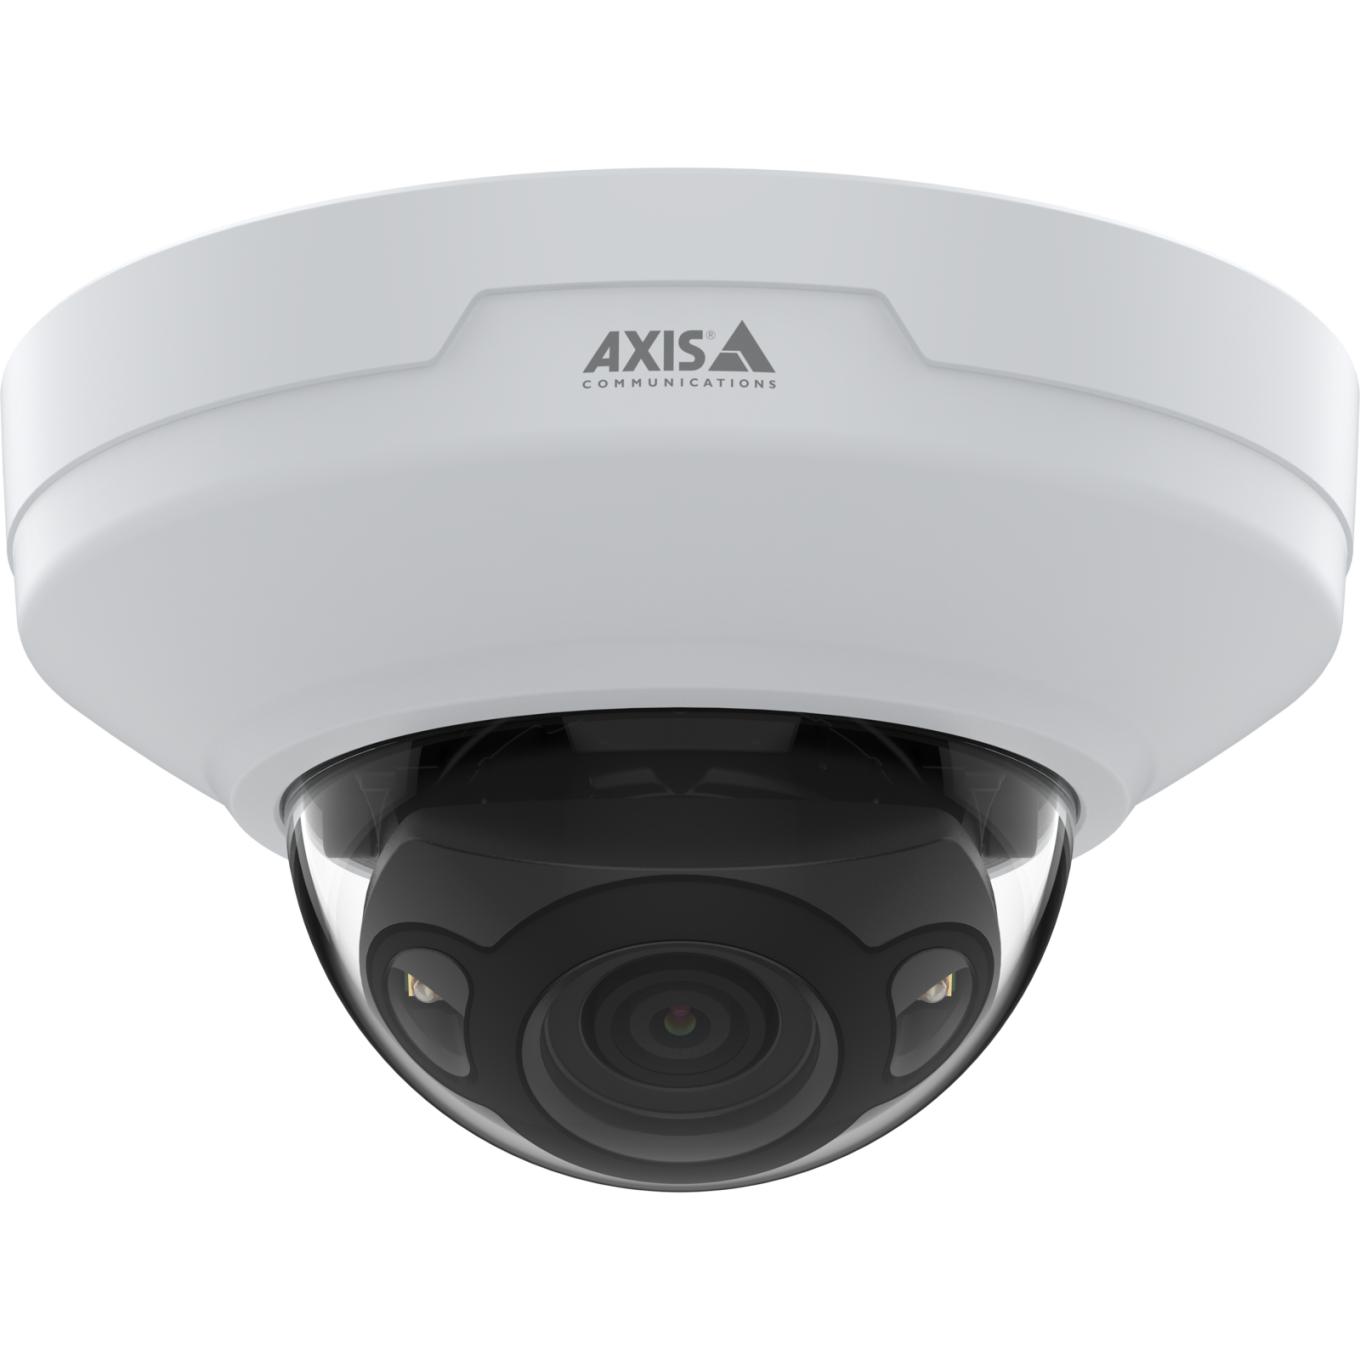 AXIS M4218-LV Dome Camera, ceiling, viewed from its front